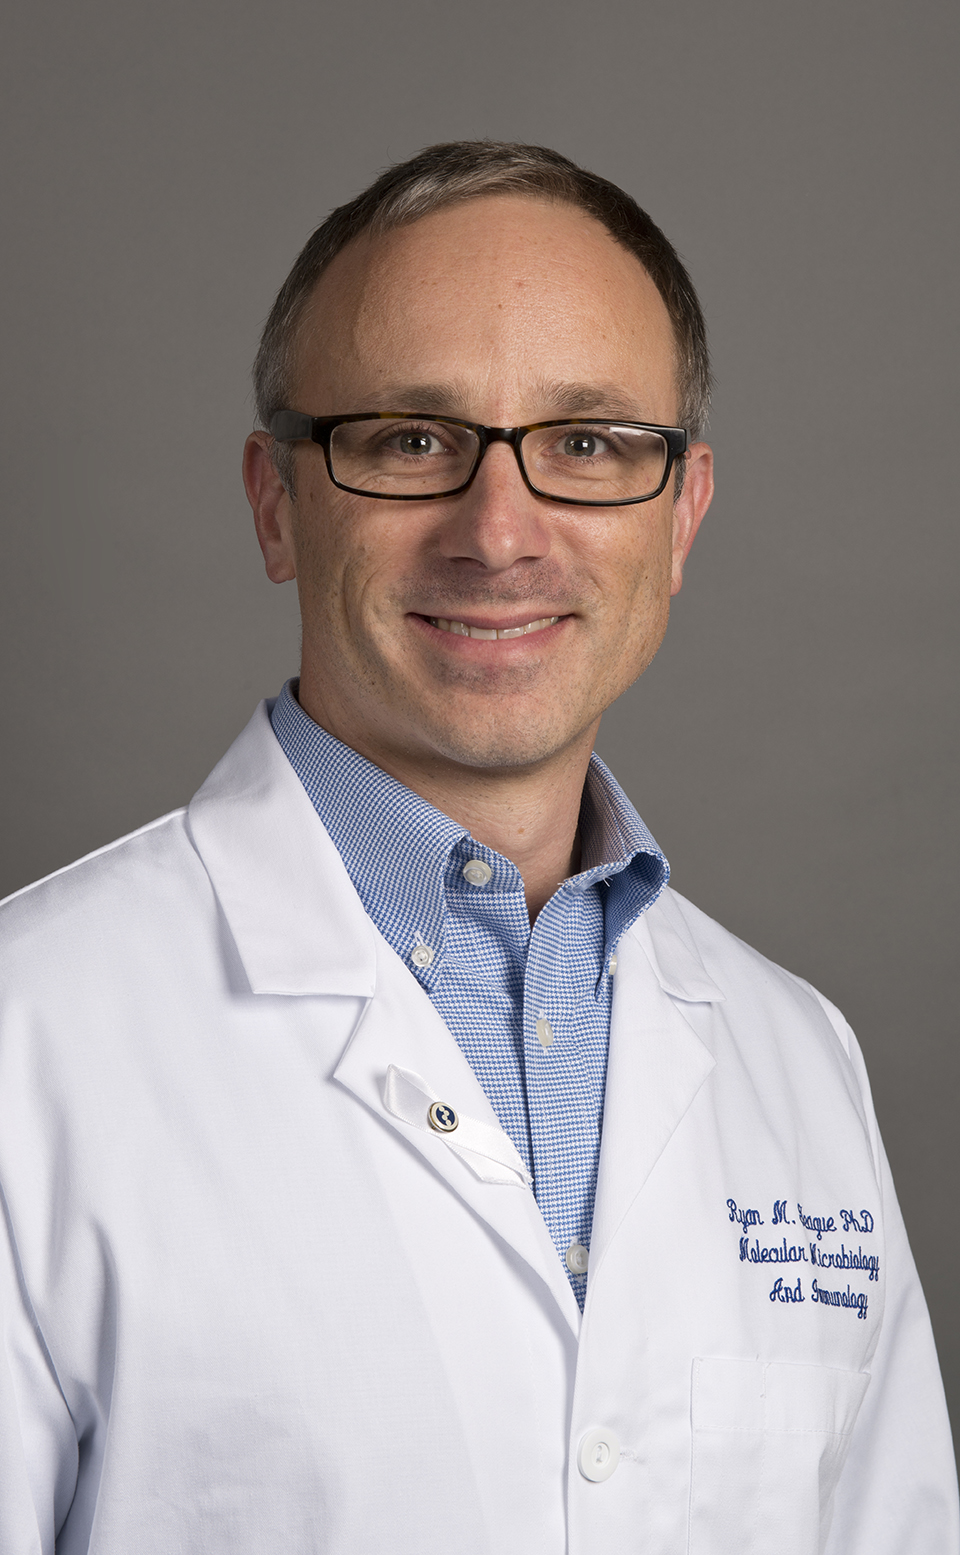 A photo of Dr. Ryan Teague wearing a white lab coat.